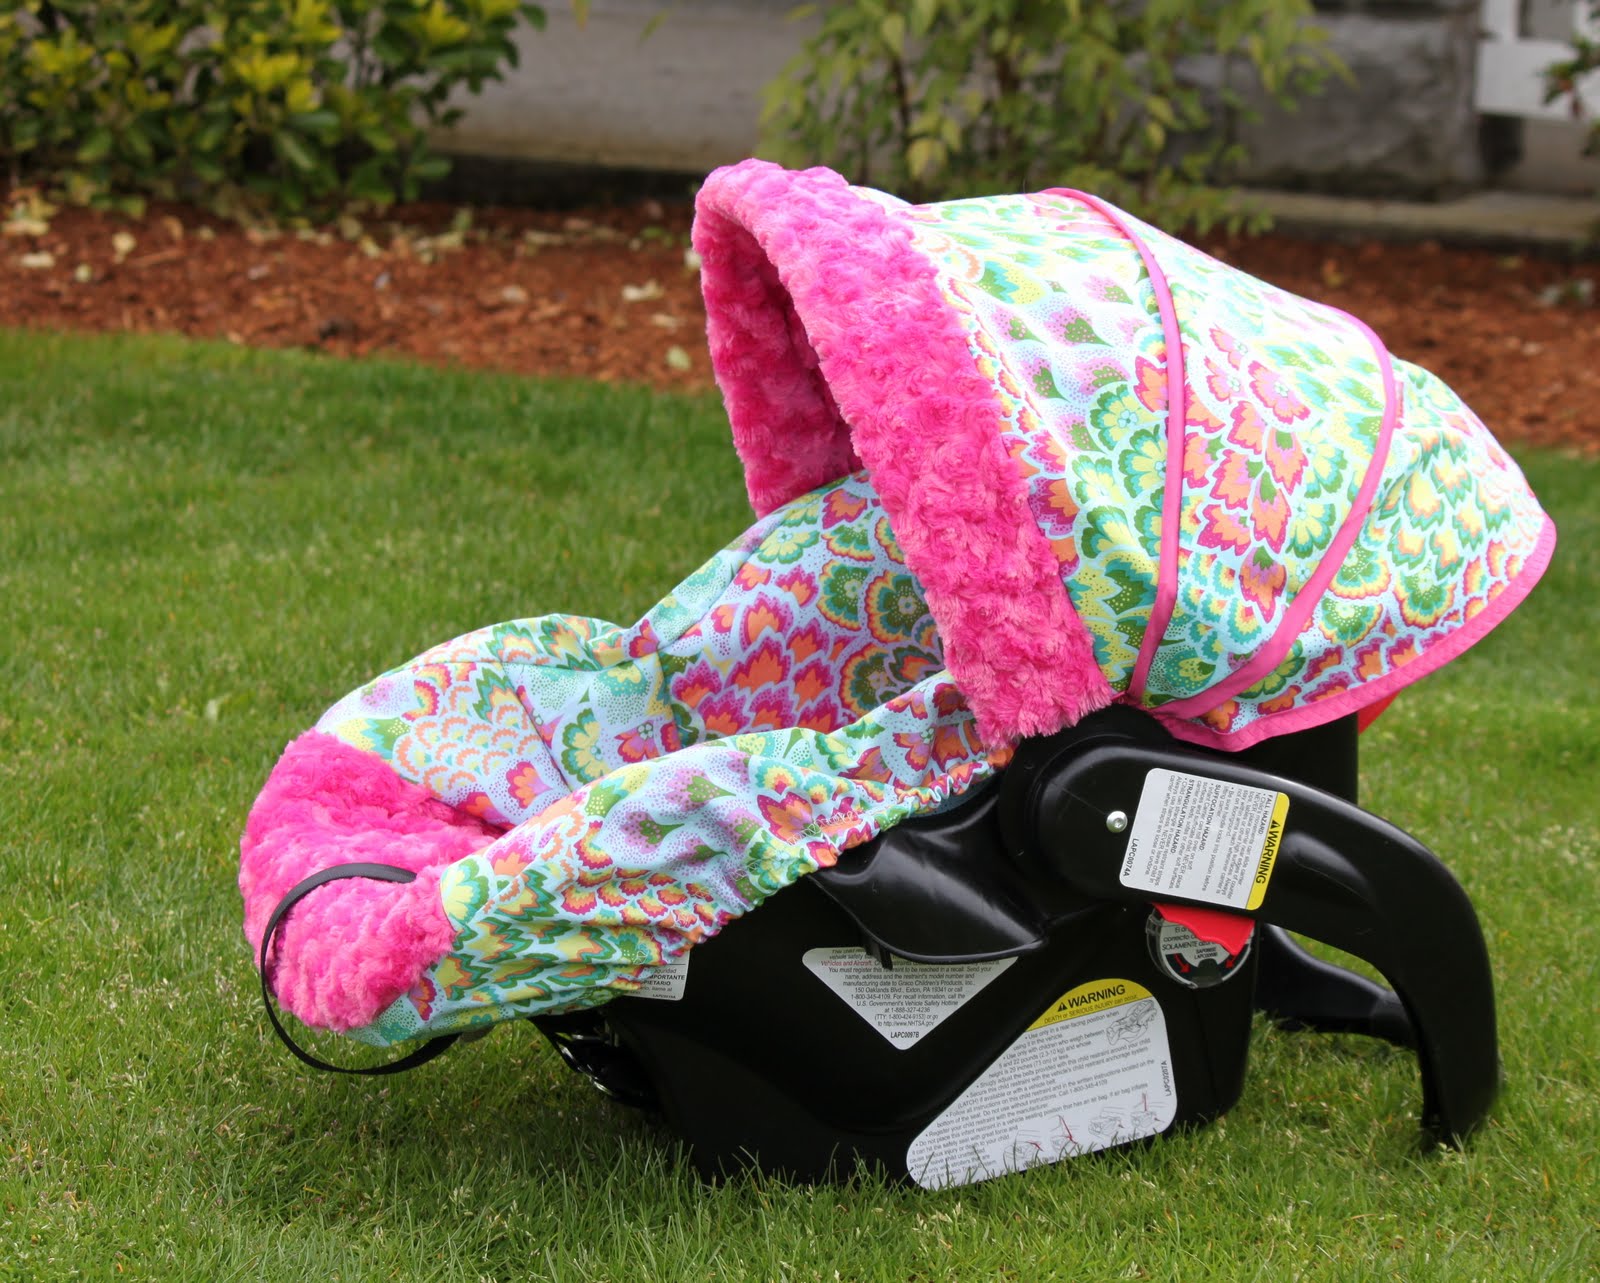 Infant Car Seat Cover | Car Seat Cover | Convertible Car Seat Cover